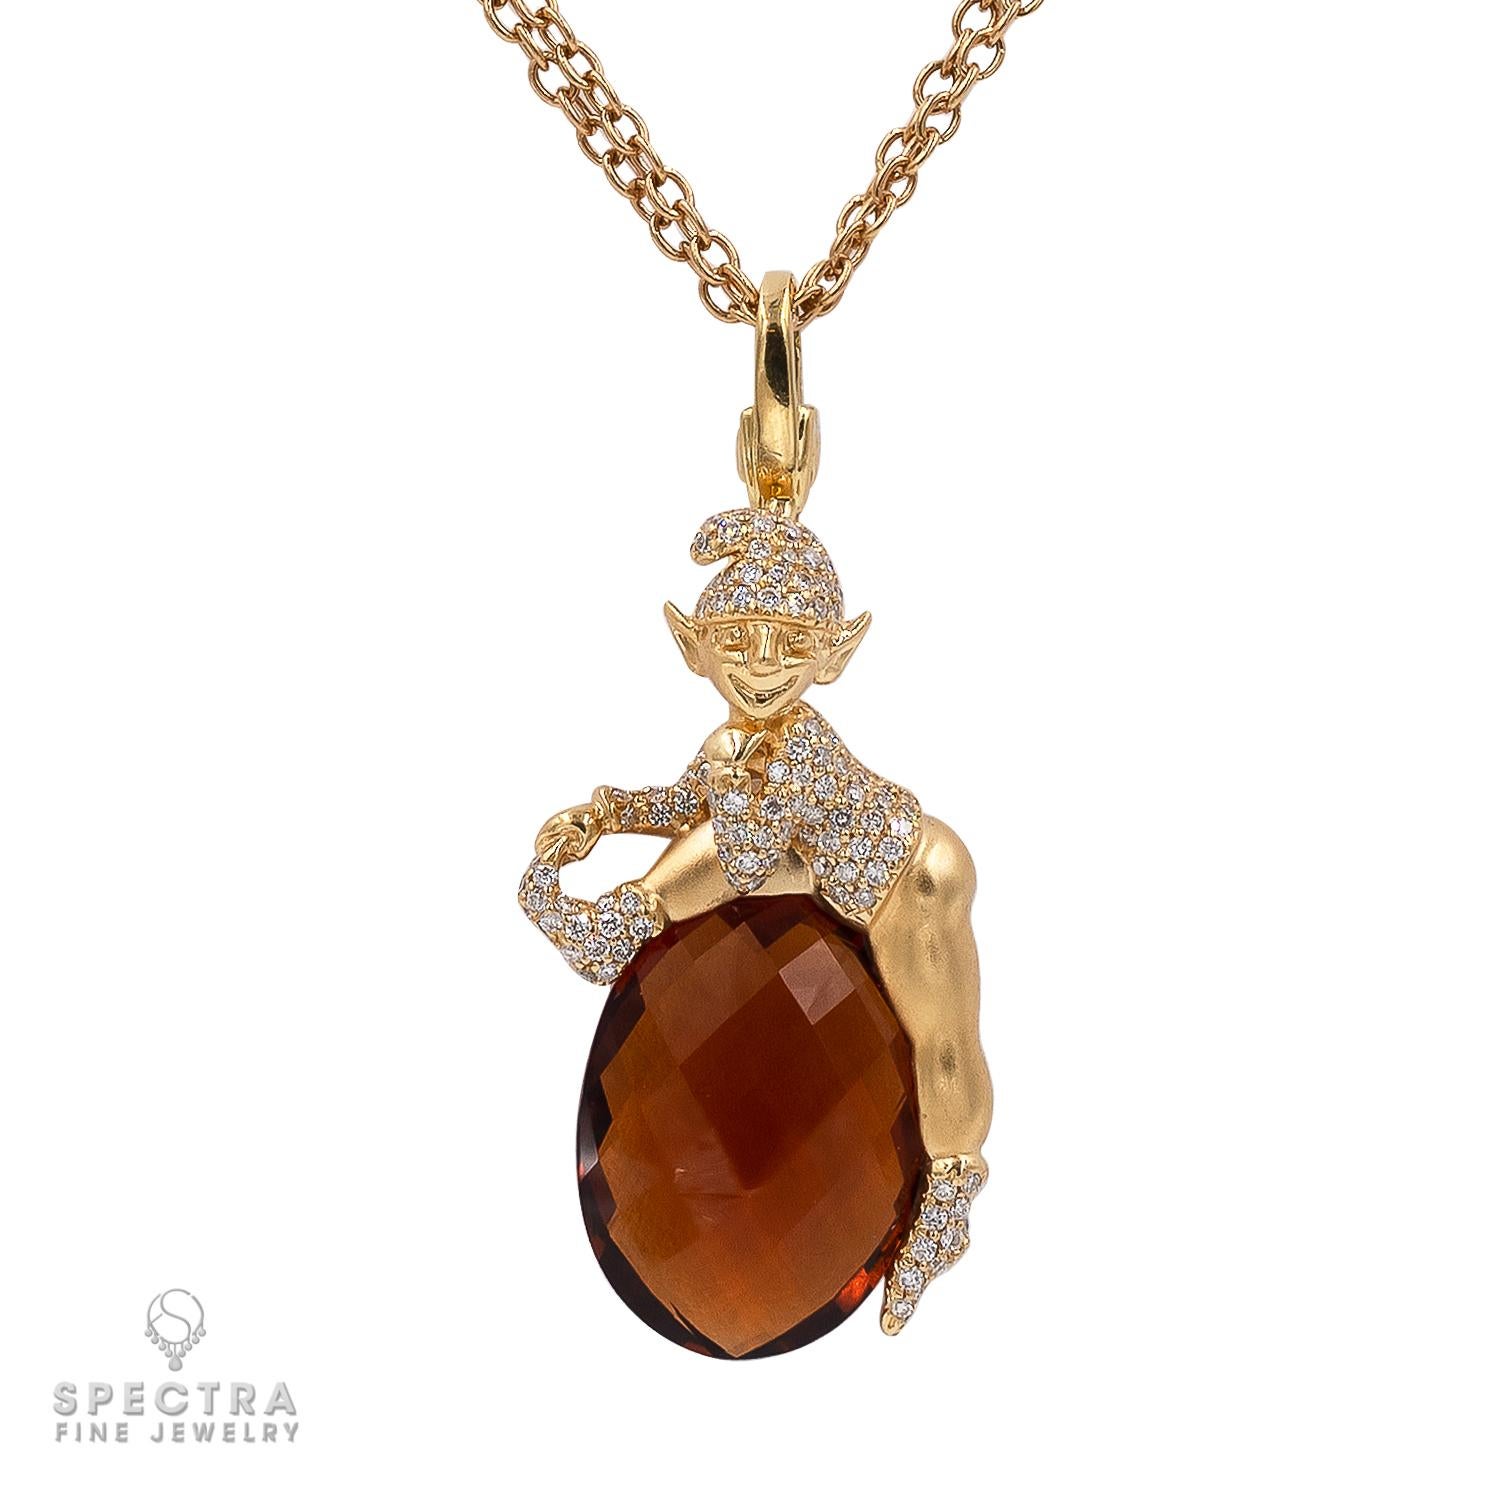 Indulge in the whimsical charm of this finely crafted pendant, a delightful creation from the esteemed artisans at Crivelli in Italy. Fashioned from solid 18K Yellow Gold, it showcases a playful Elf perched atop a gleaming Gem (brown topaz), evoking